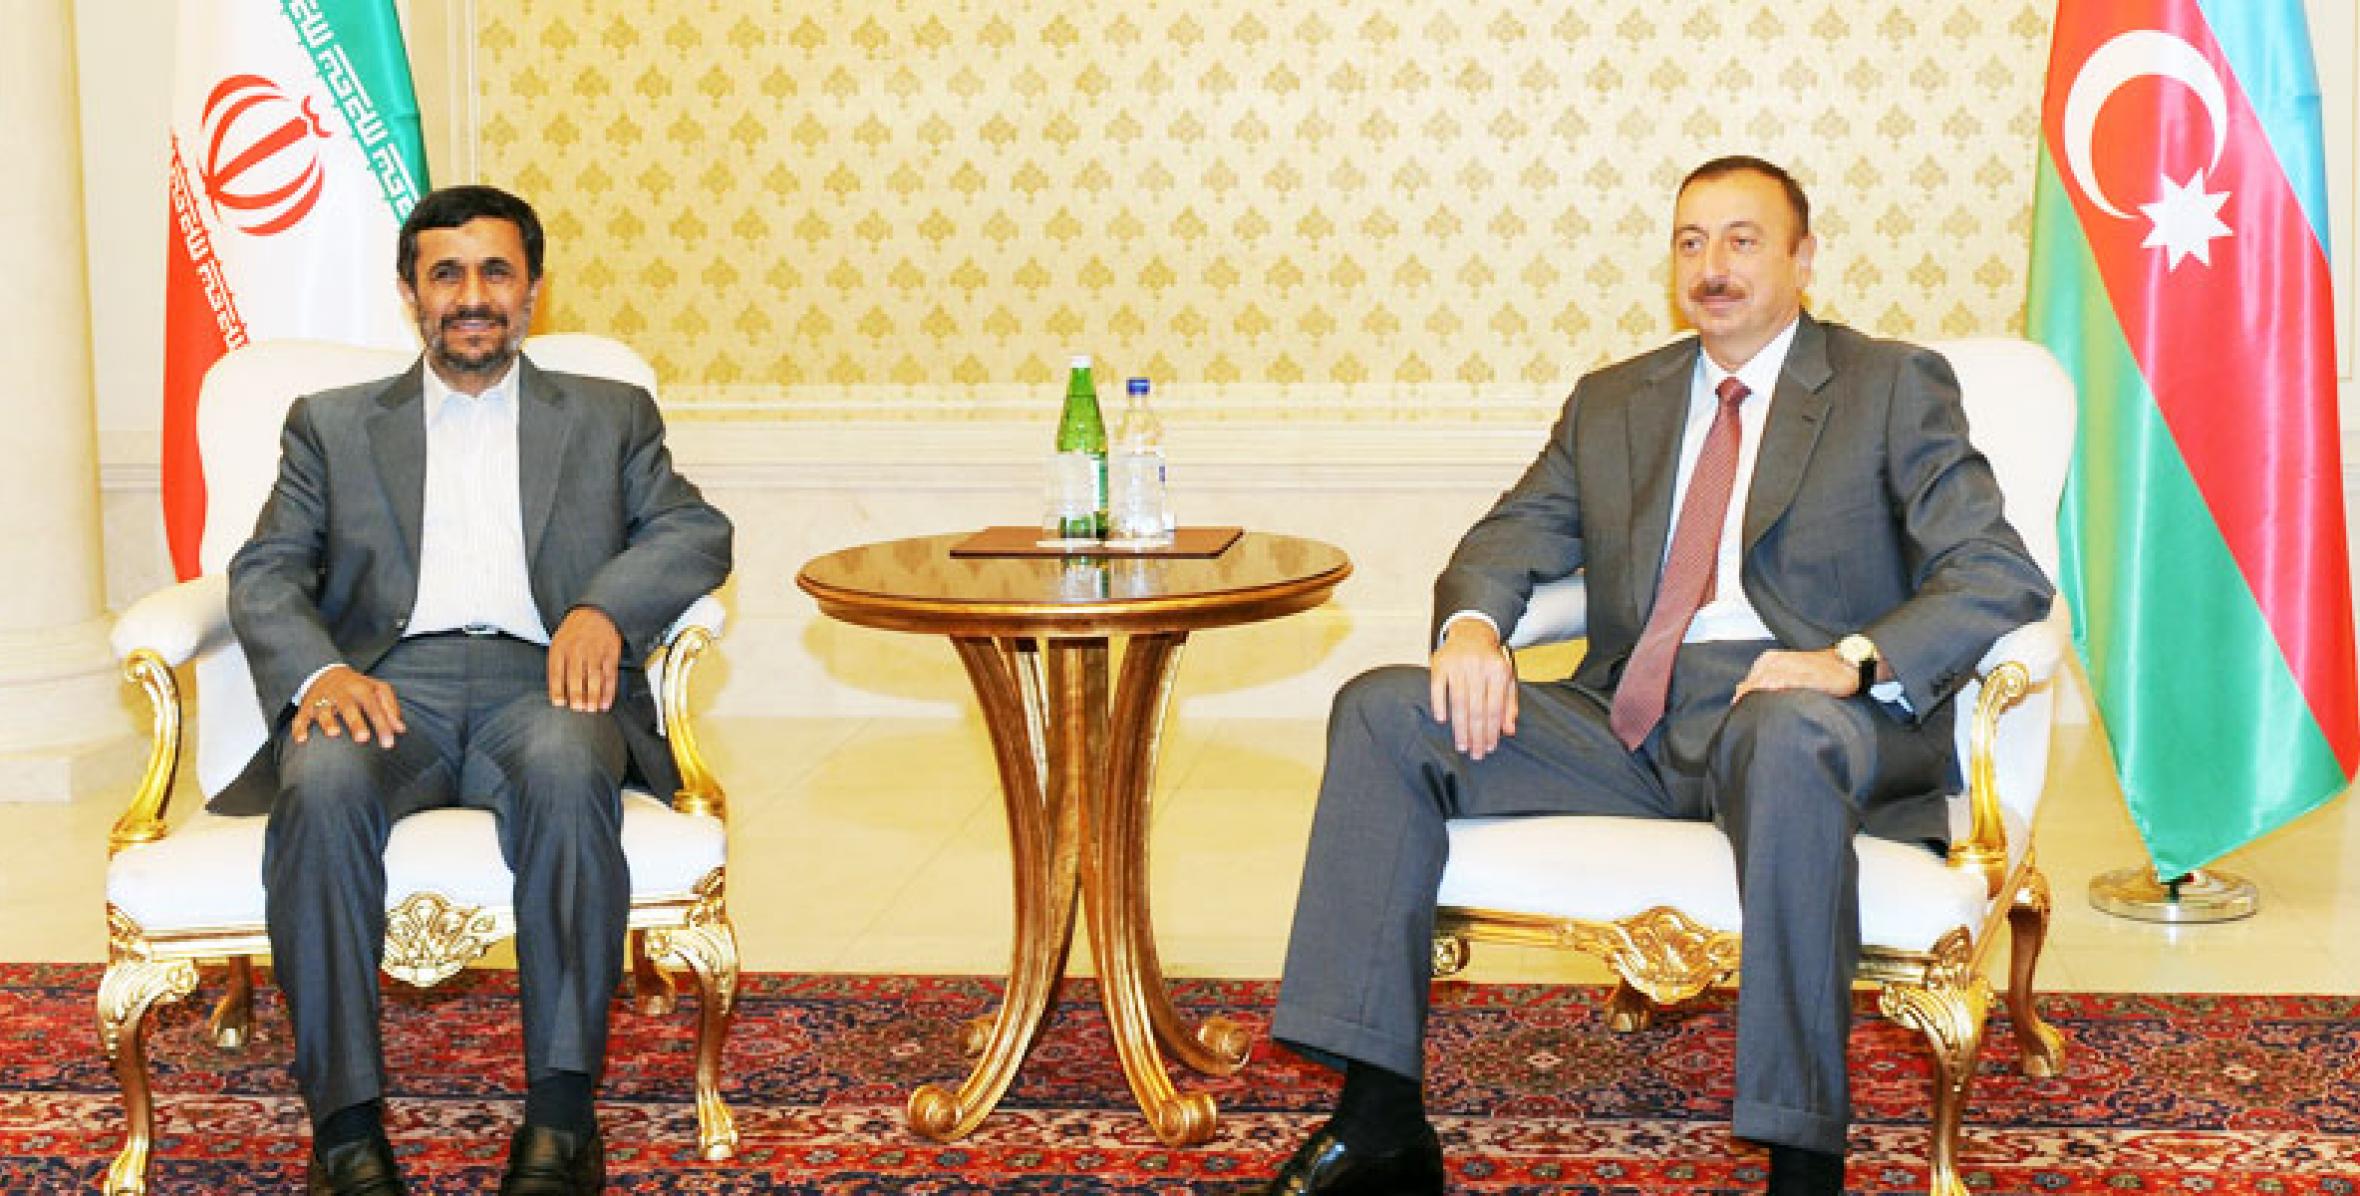 Face to face meeting of Ilham Aliyev and Mahmoud Ahmadinejad, the President of the Islamic Republic of Iran took place